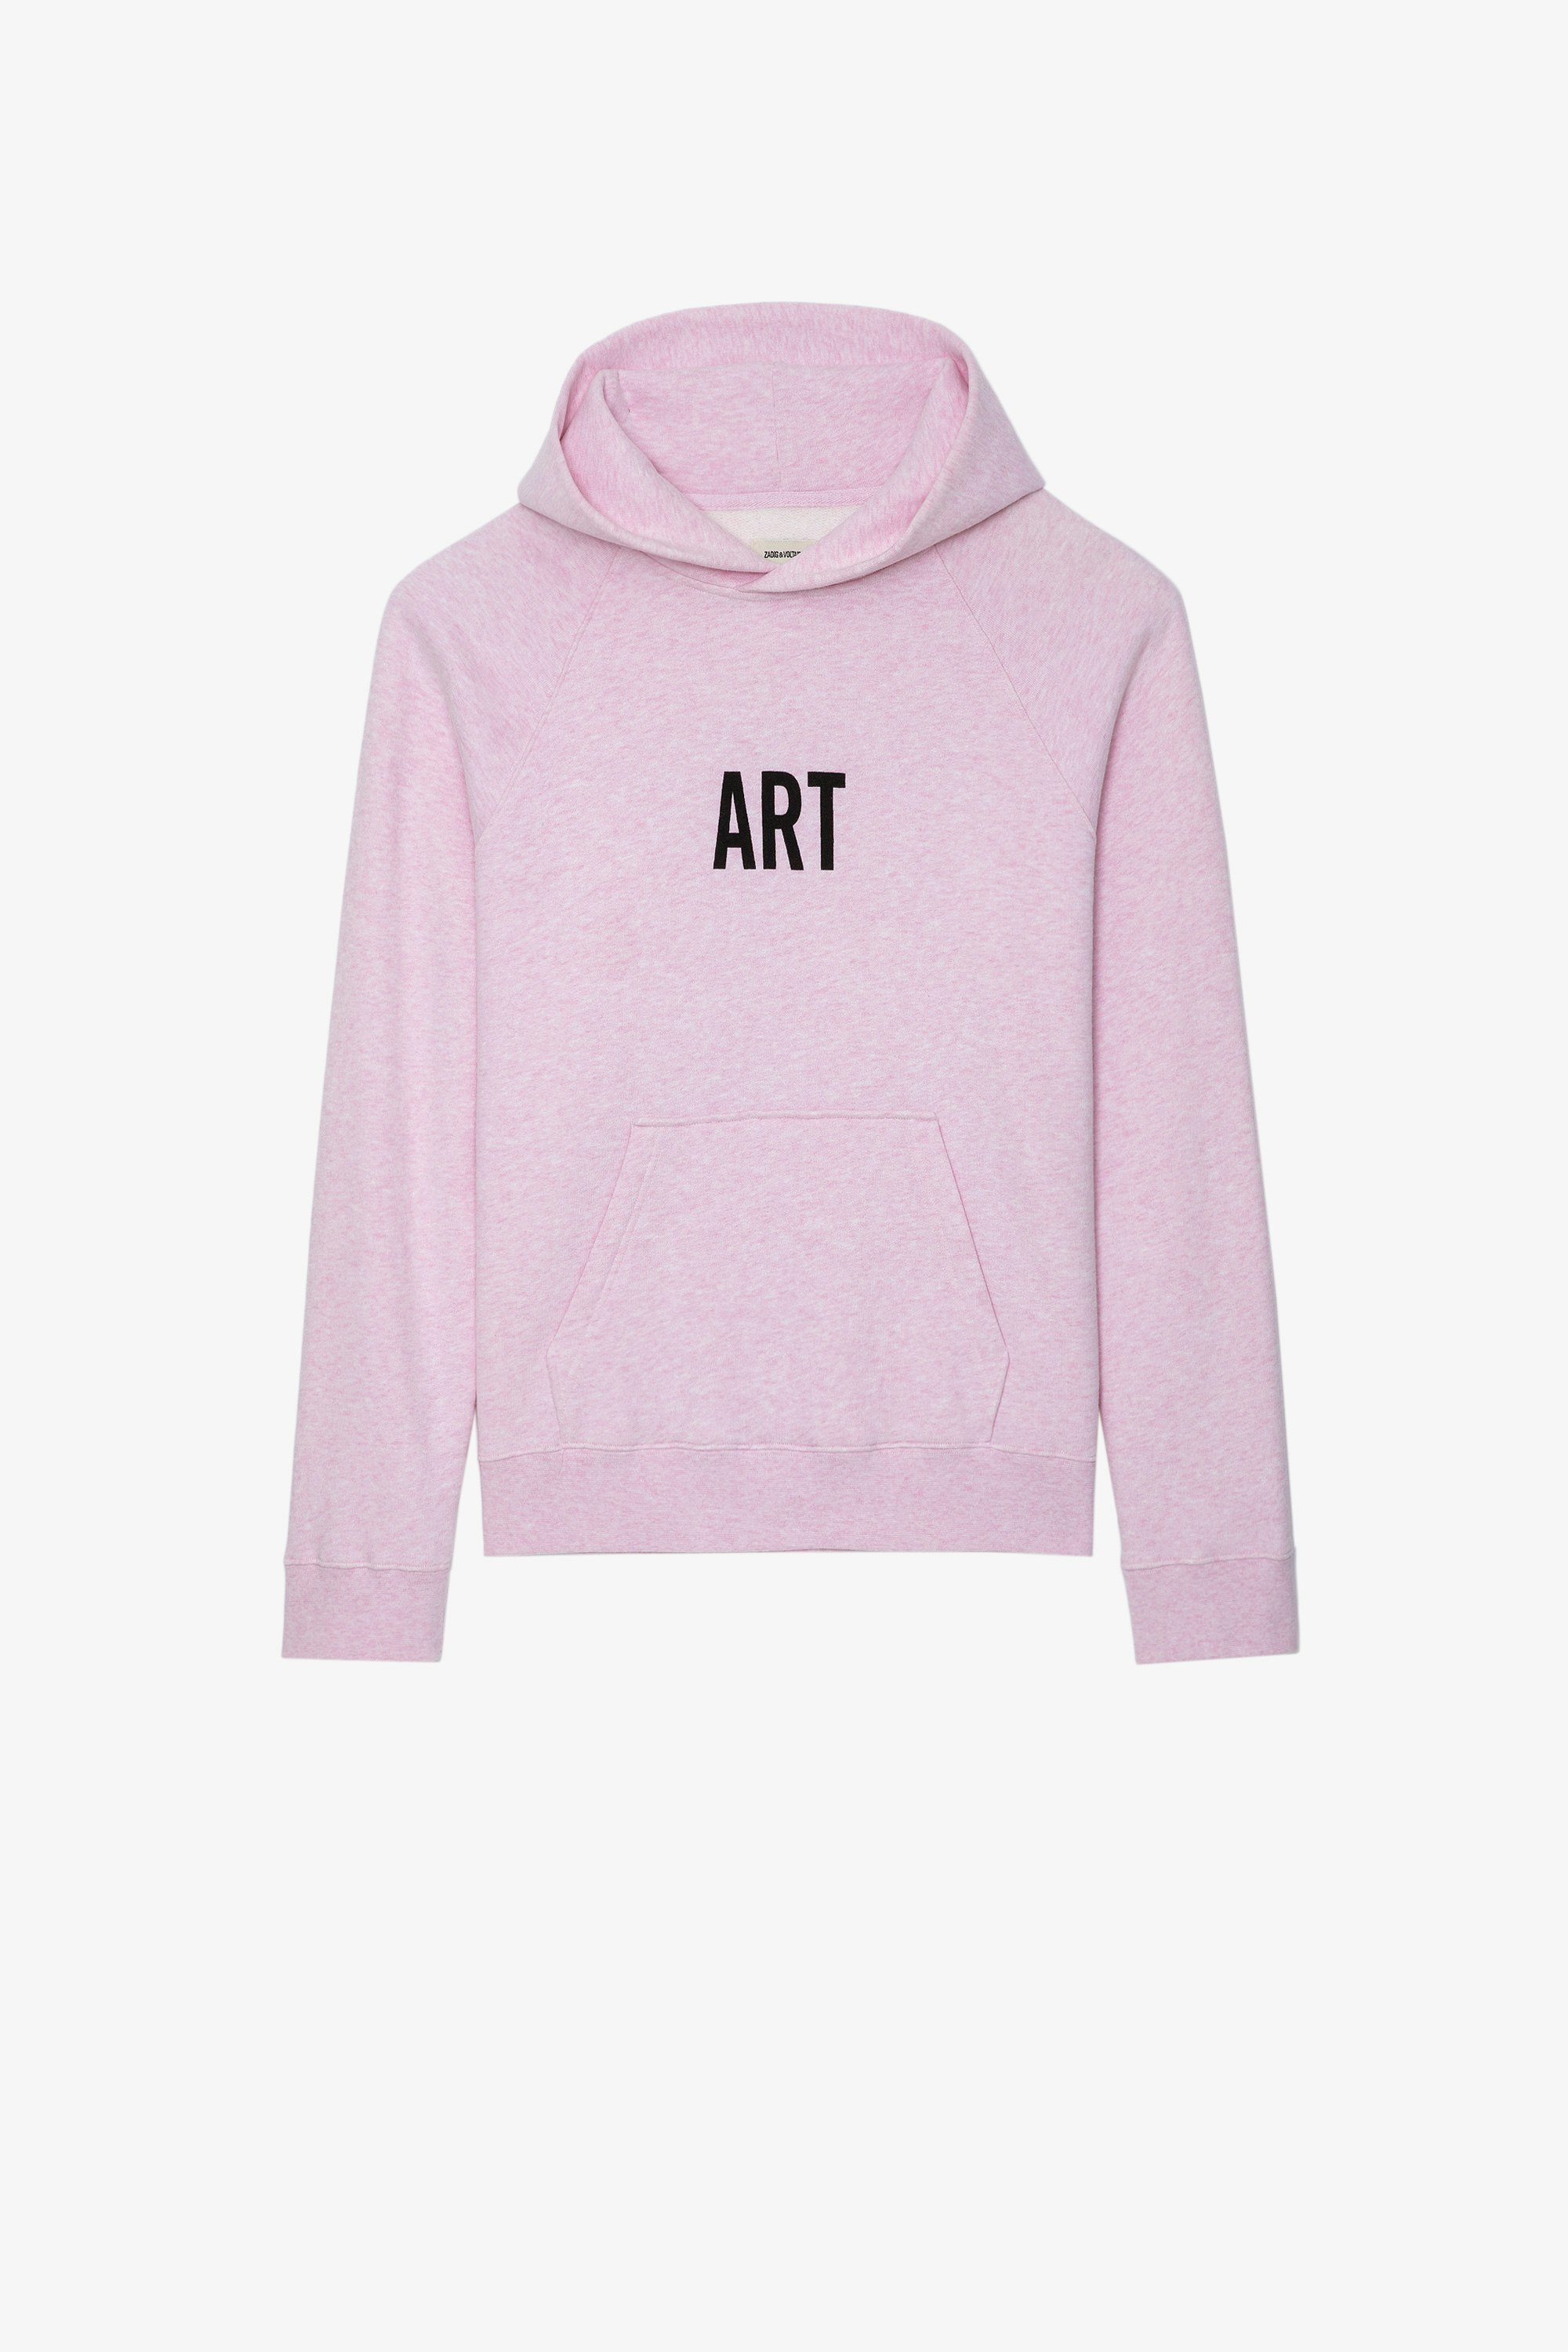 Georgy Photoprint Sweatshirt Women’s hooded sweatshirt in pink cotton with a photoprint and the slogans “Art” and “Amour Toujours”